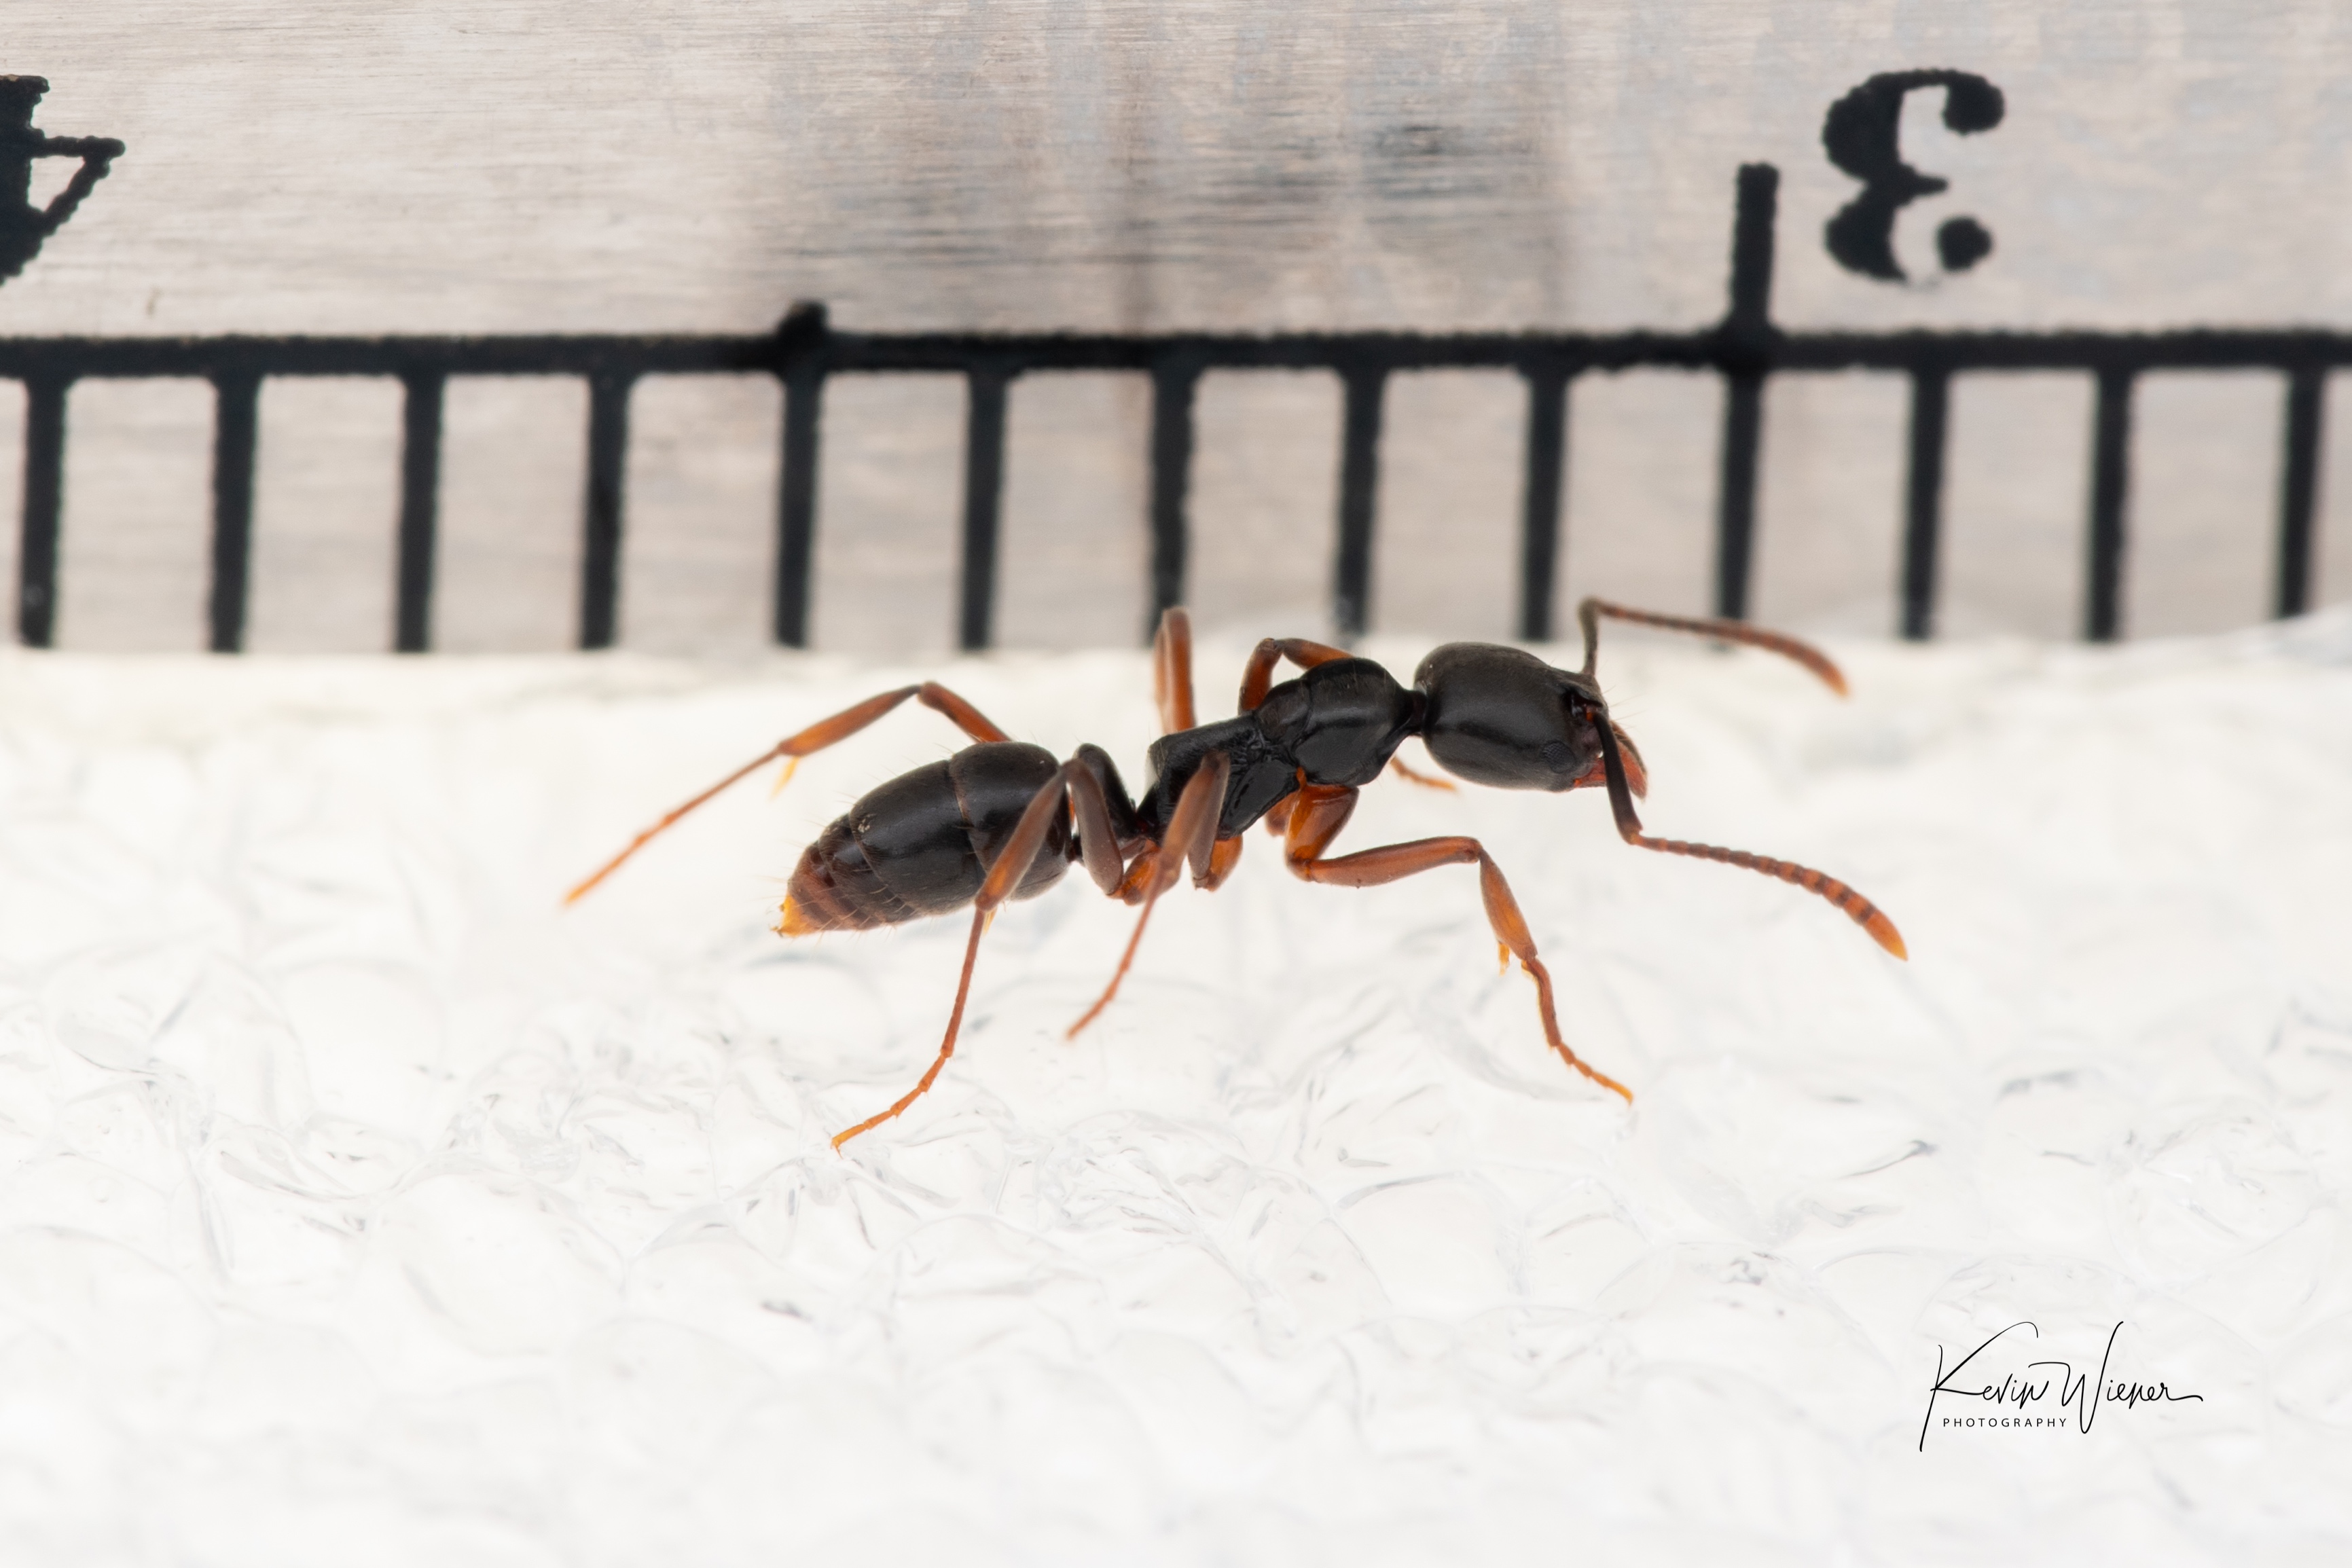 Relative size comparison of Asian needle ant